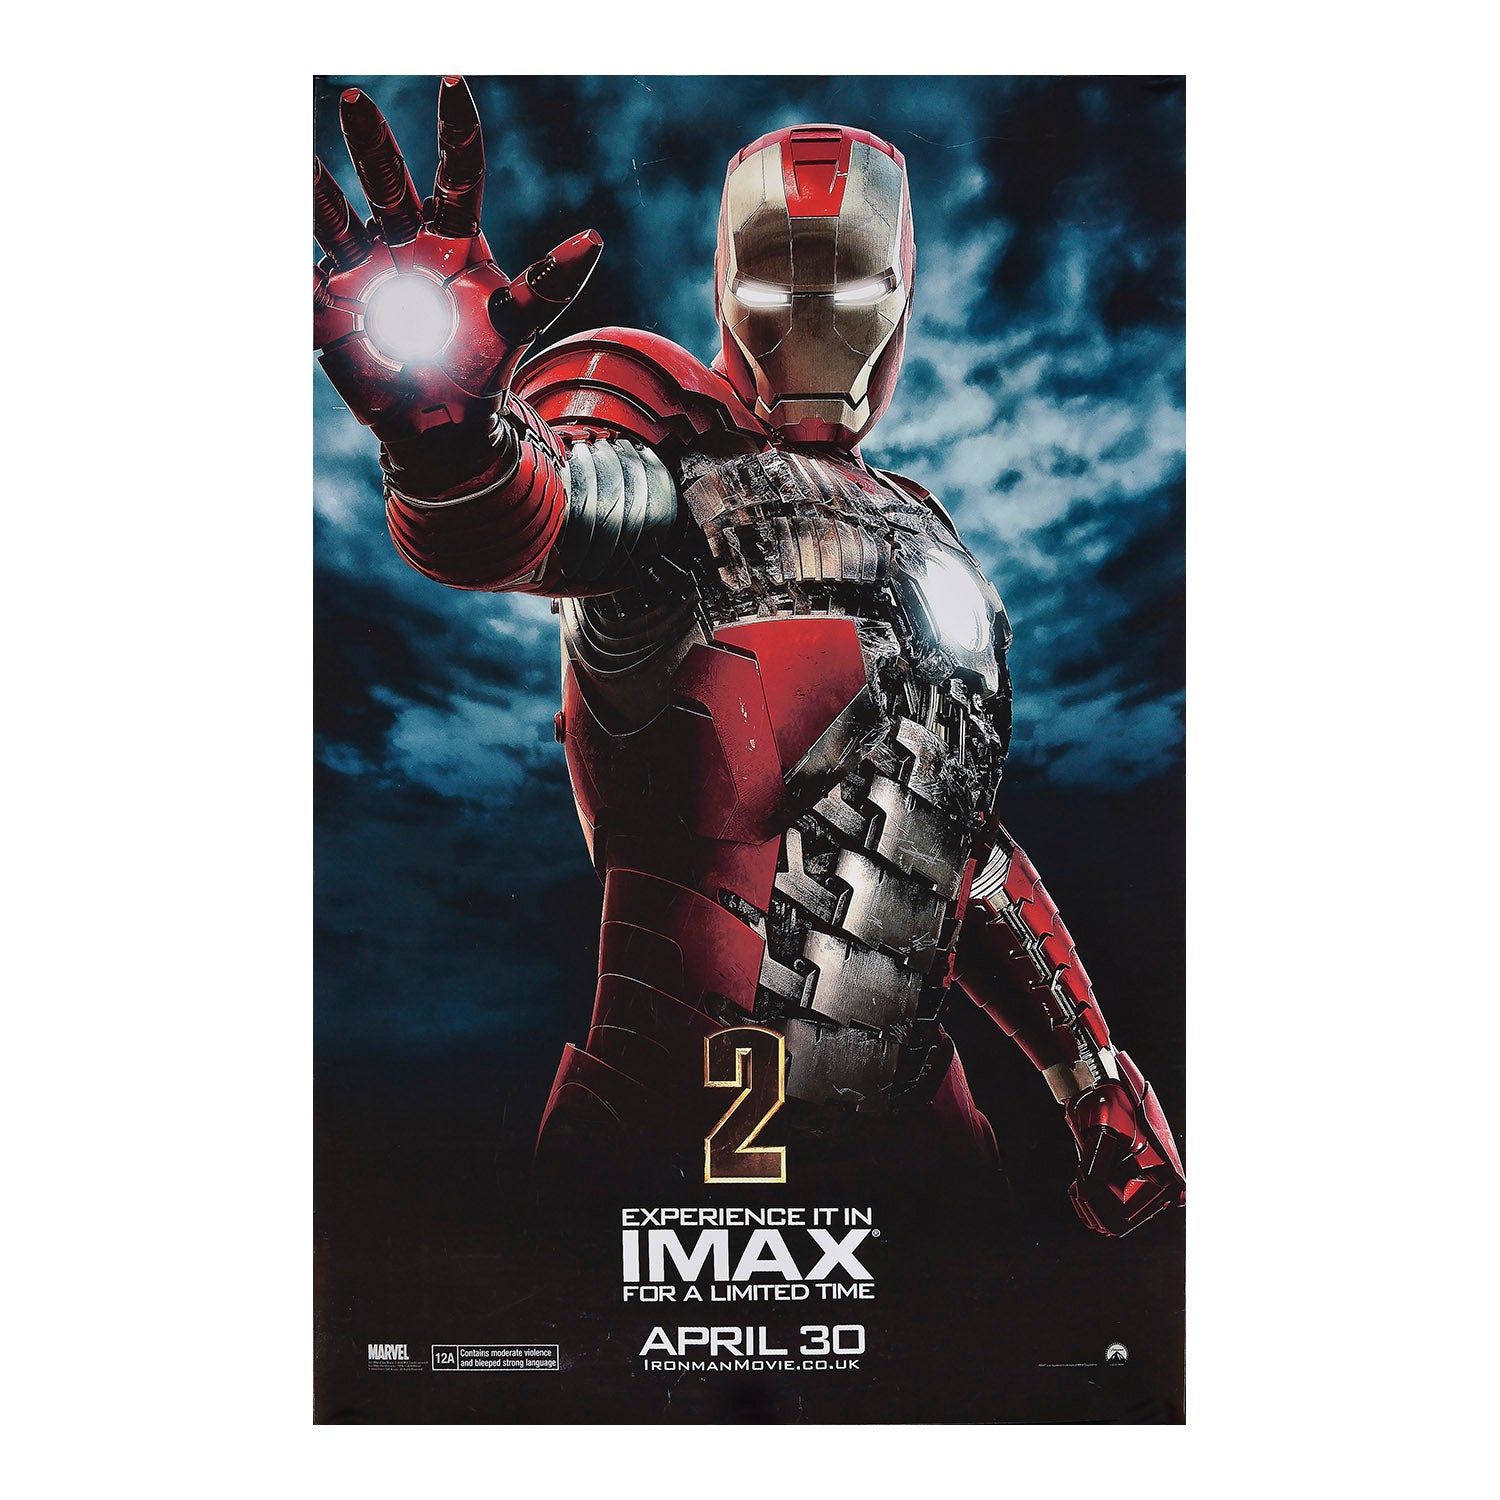 Original, large format, film poster for the release of Iron Man 2, IMAX, 2010. The poster was specially produced for display at IMAX cinemas and features exclusive artwork of Iron Man/Tony Stark (played by Robert Downey Jr.)